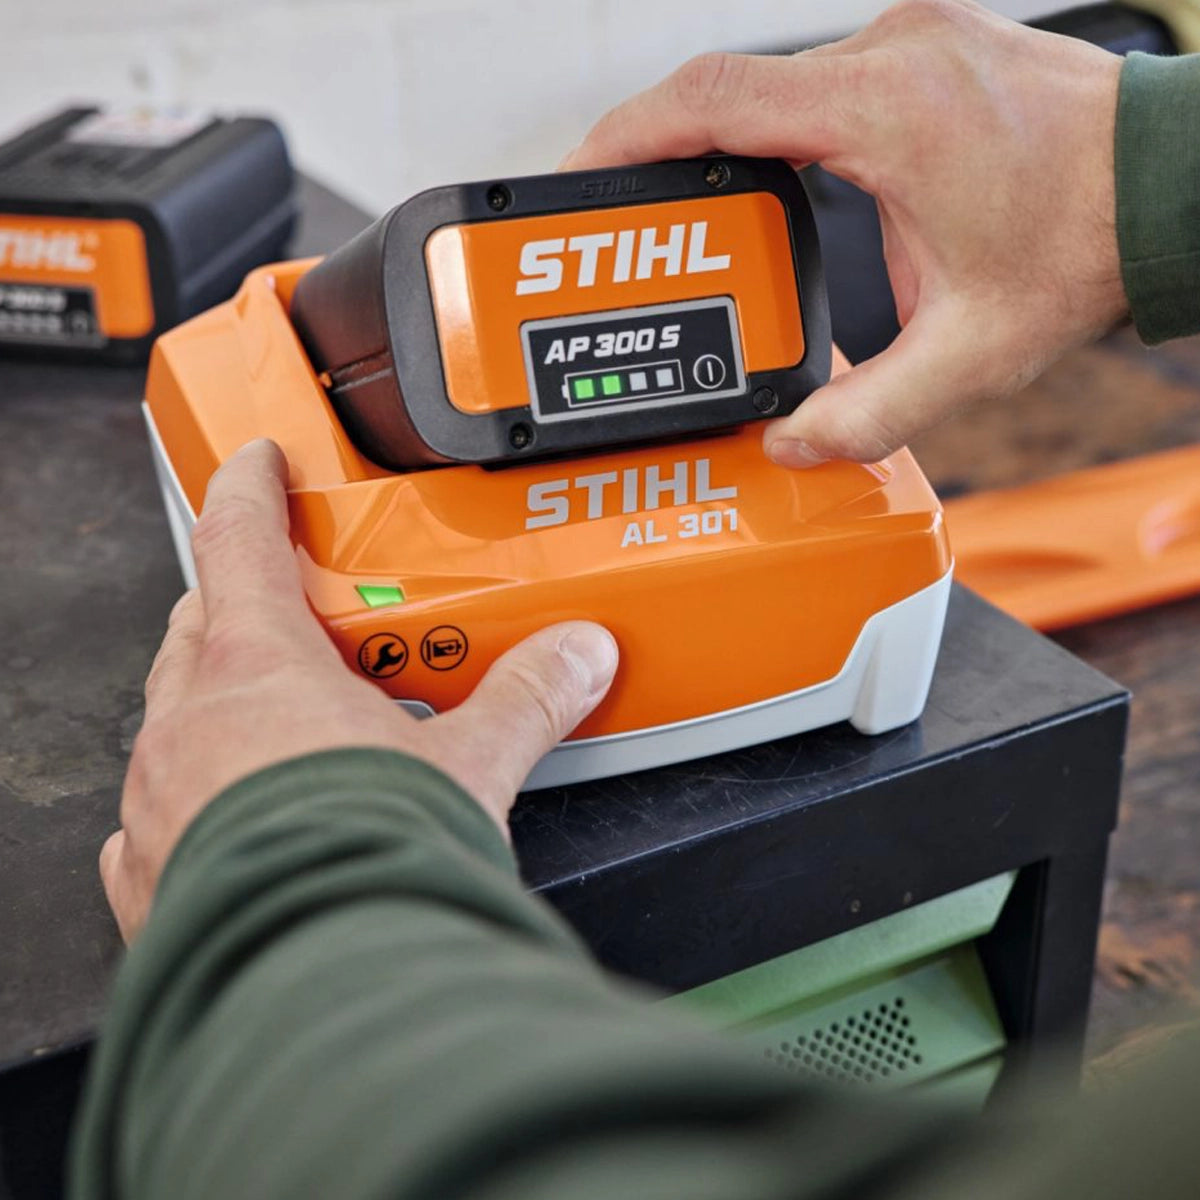 STIHL AL 301 Quick Battery Charger